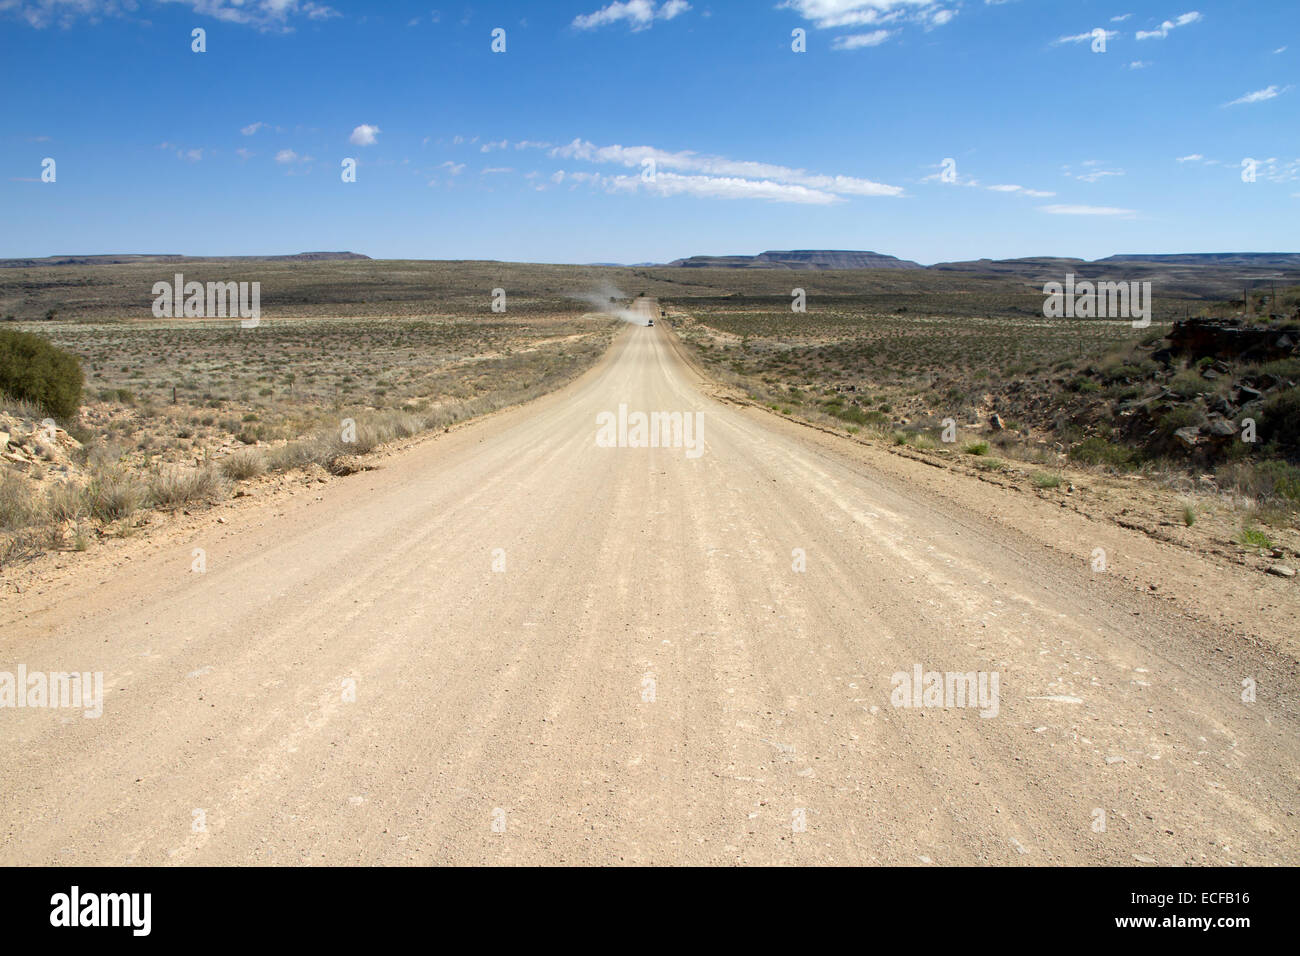 A namibian dirt road wit a far away 4x4 travelling Stock Photo